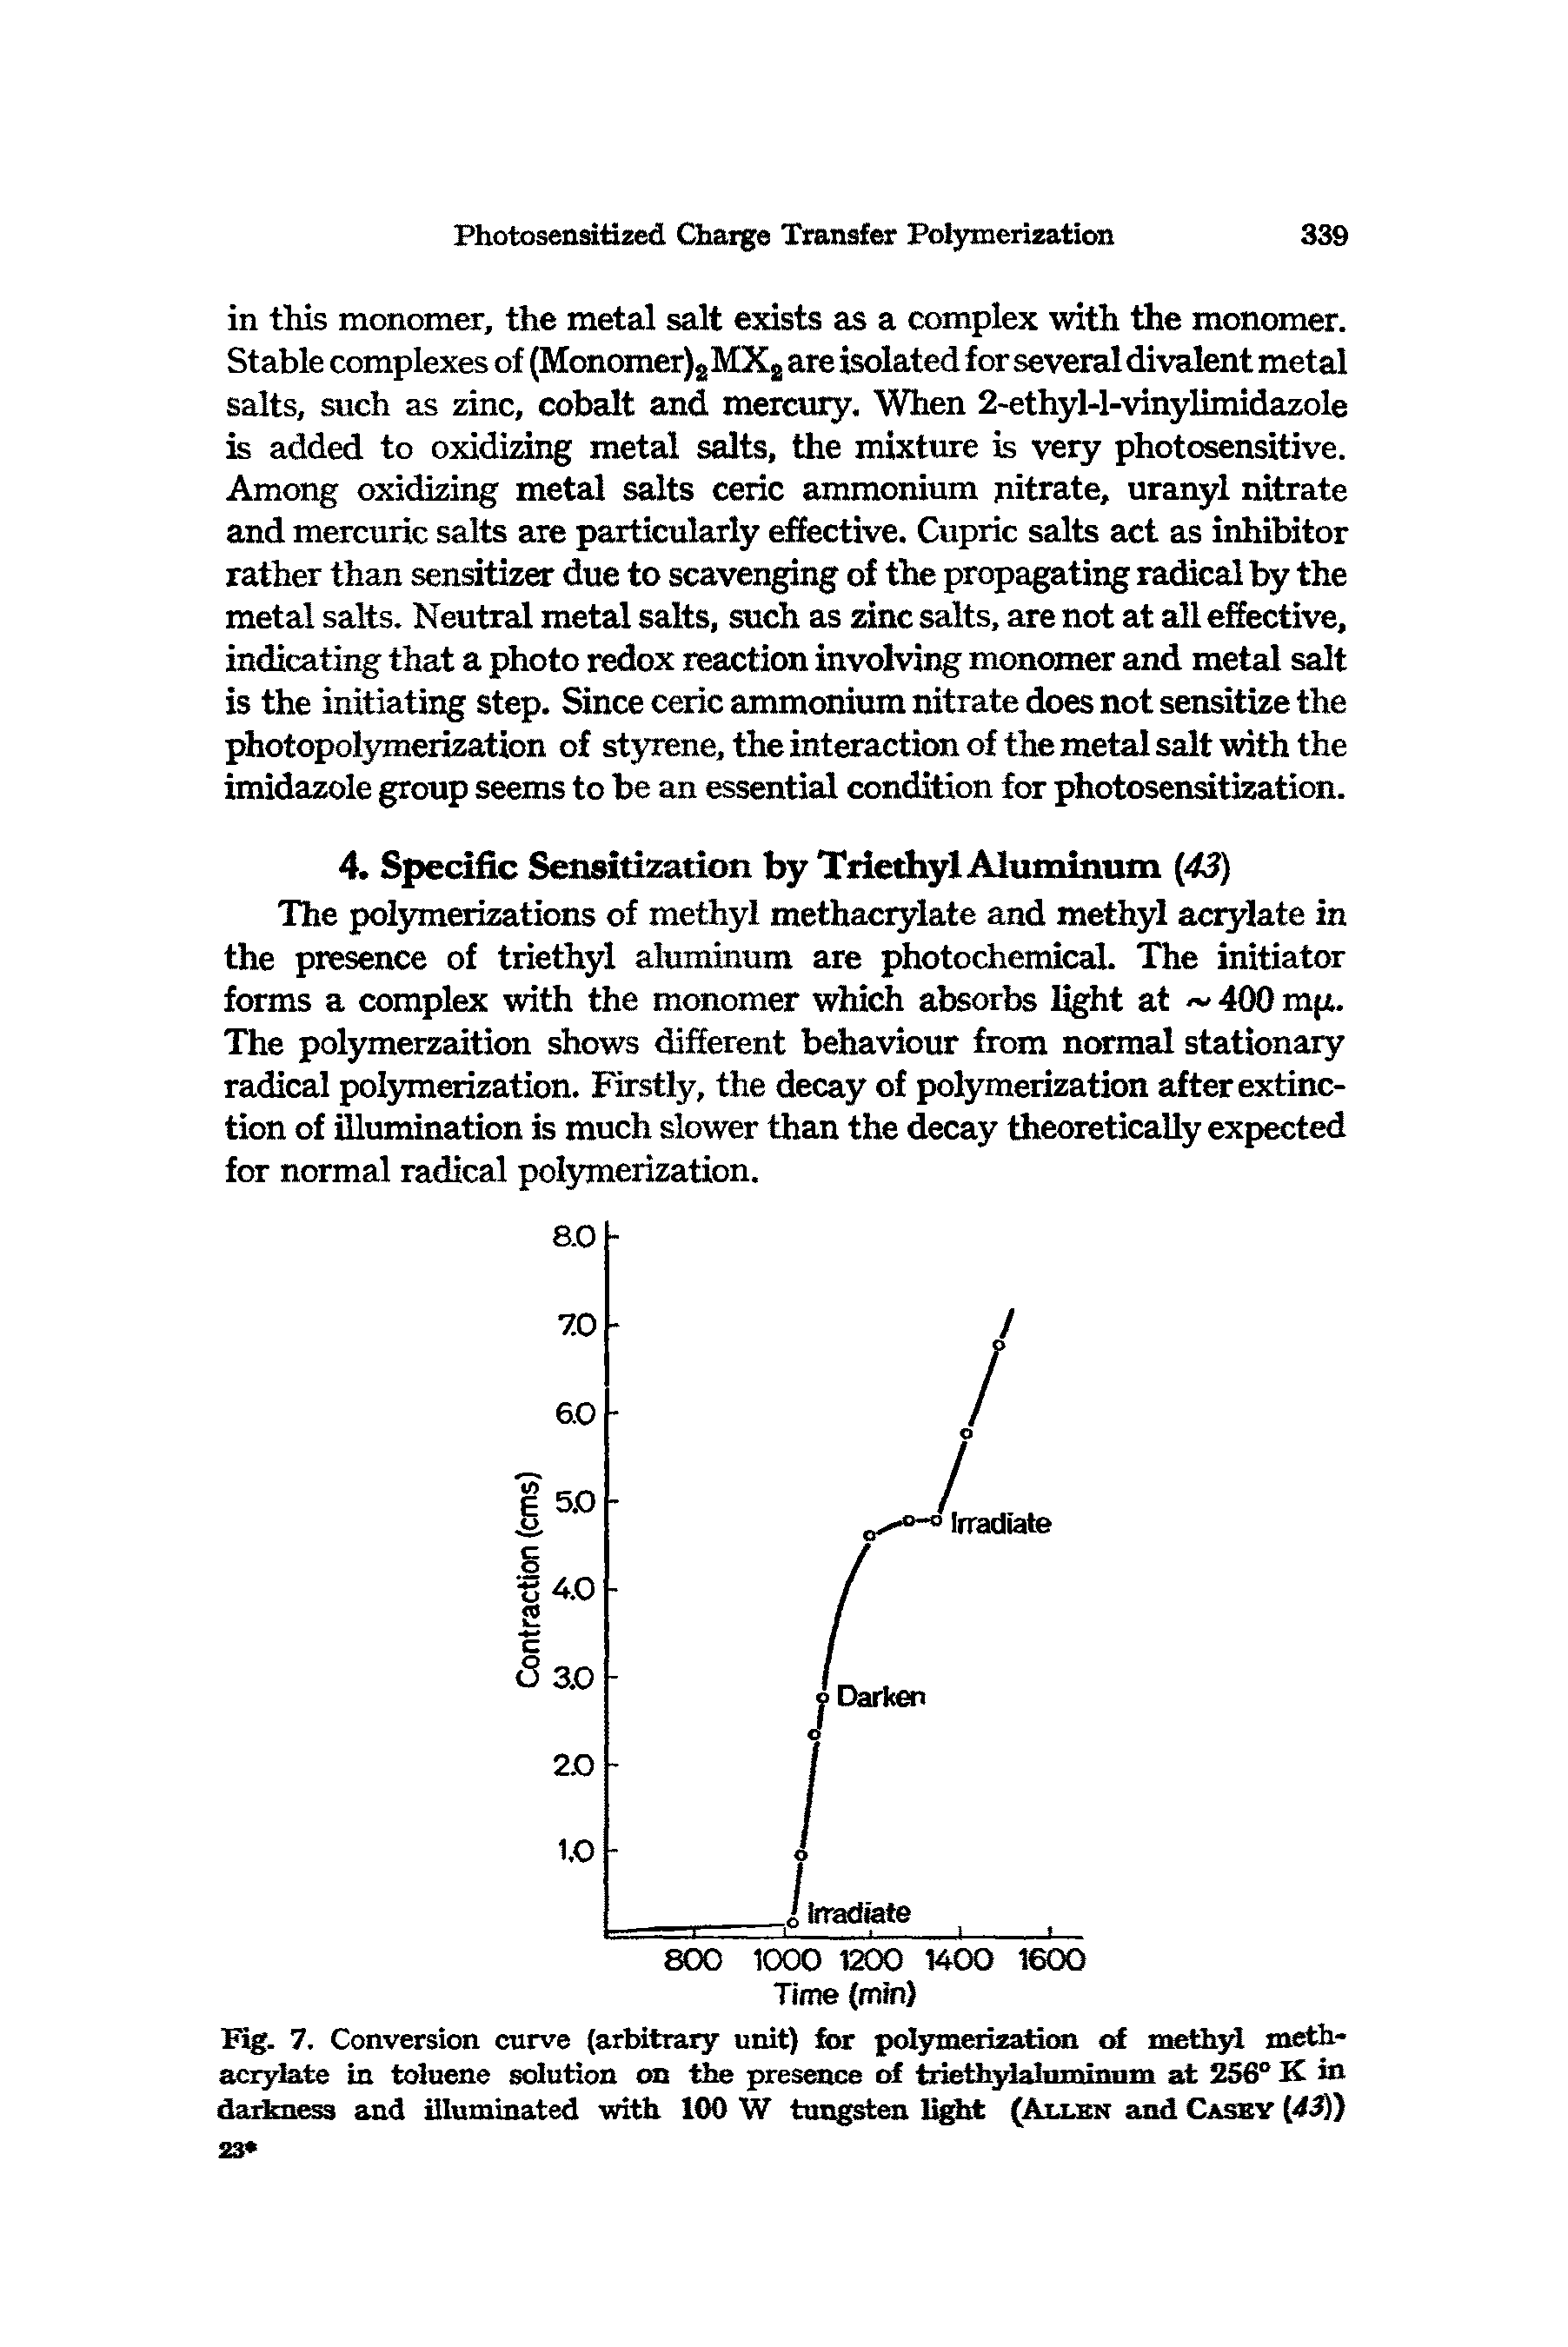 Fig. 7. Conversion curve (arbitrary unit) for polymerization of methyl methacrylate in toluene solution on the presence of triethylaluminum at 256° K in darkness and illuminated with 100 W tungsten light (Aixen and Casey [43))...